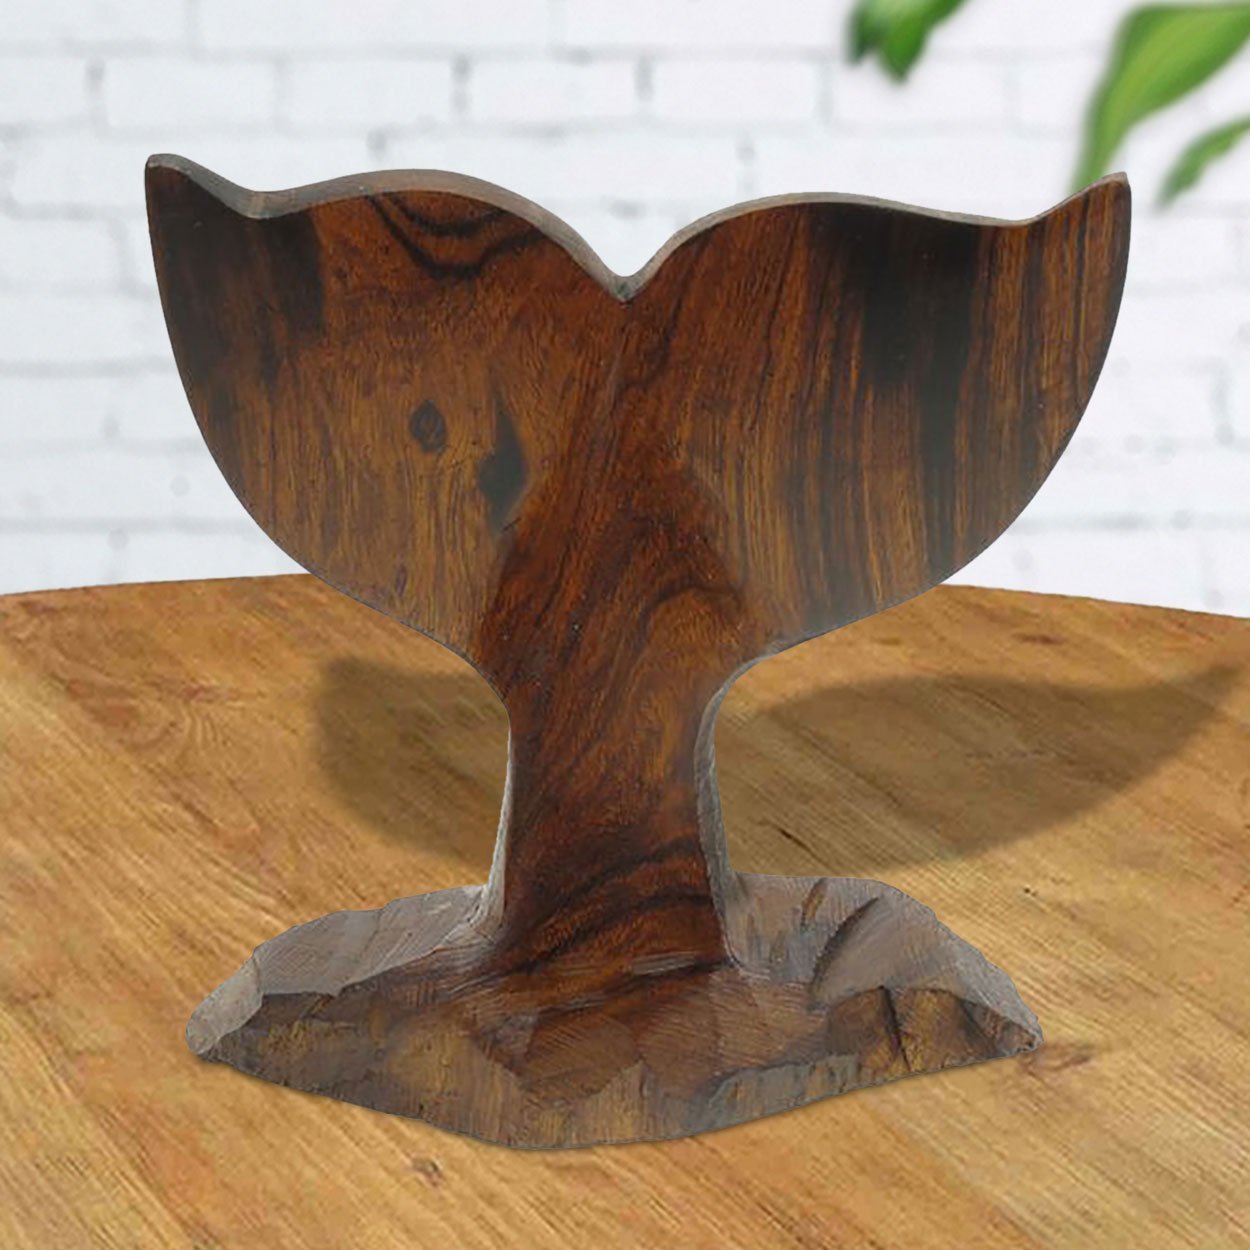 172244 - 5in Tall Whale Tail Ironwood Carving